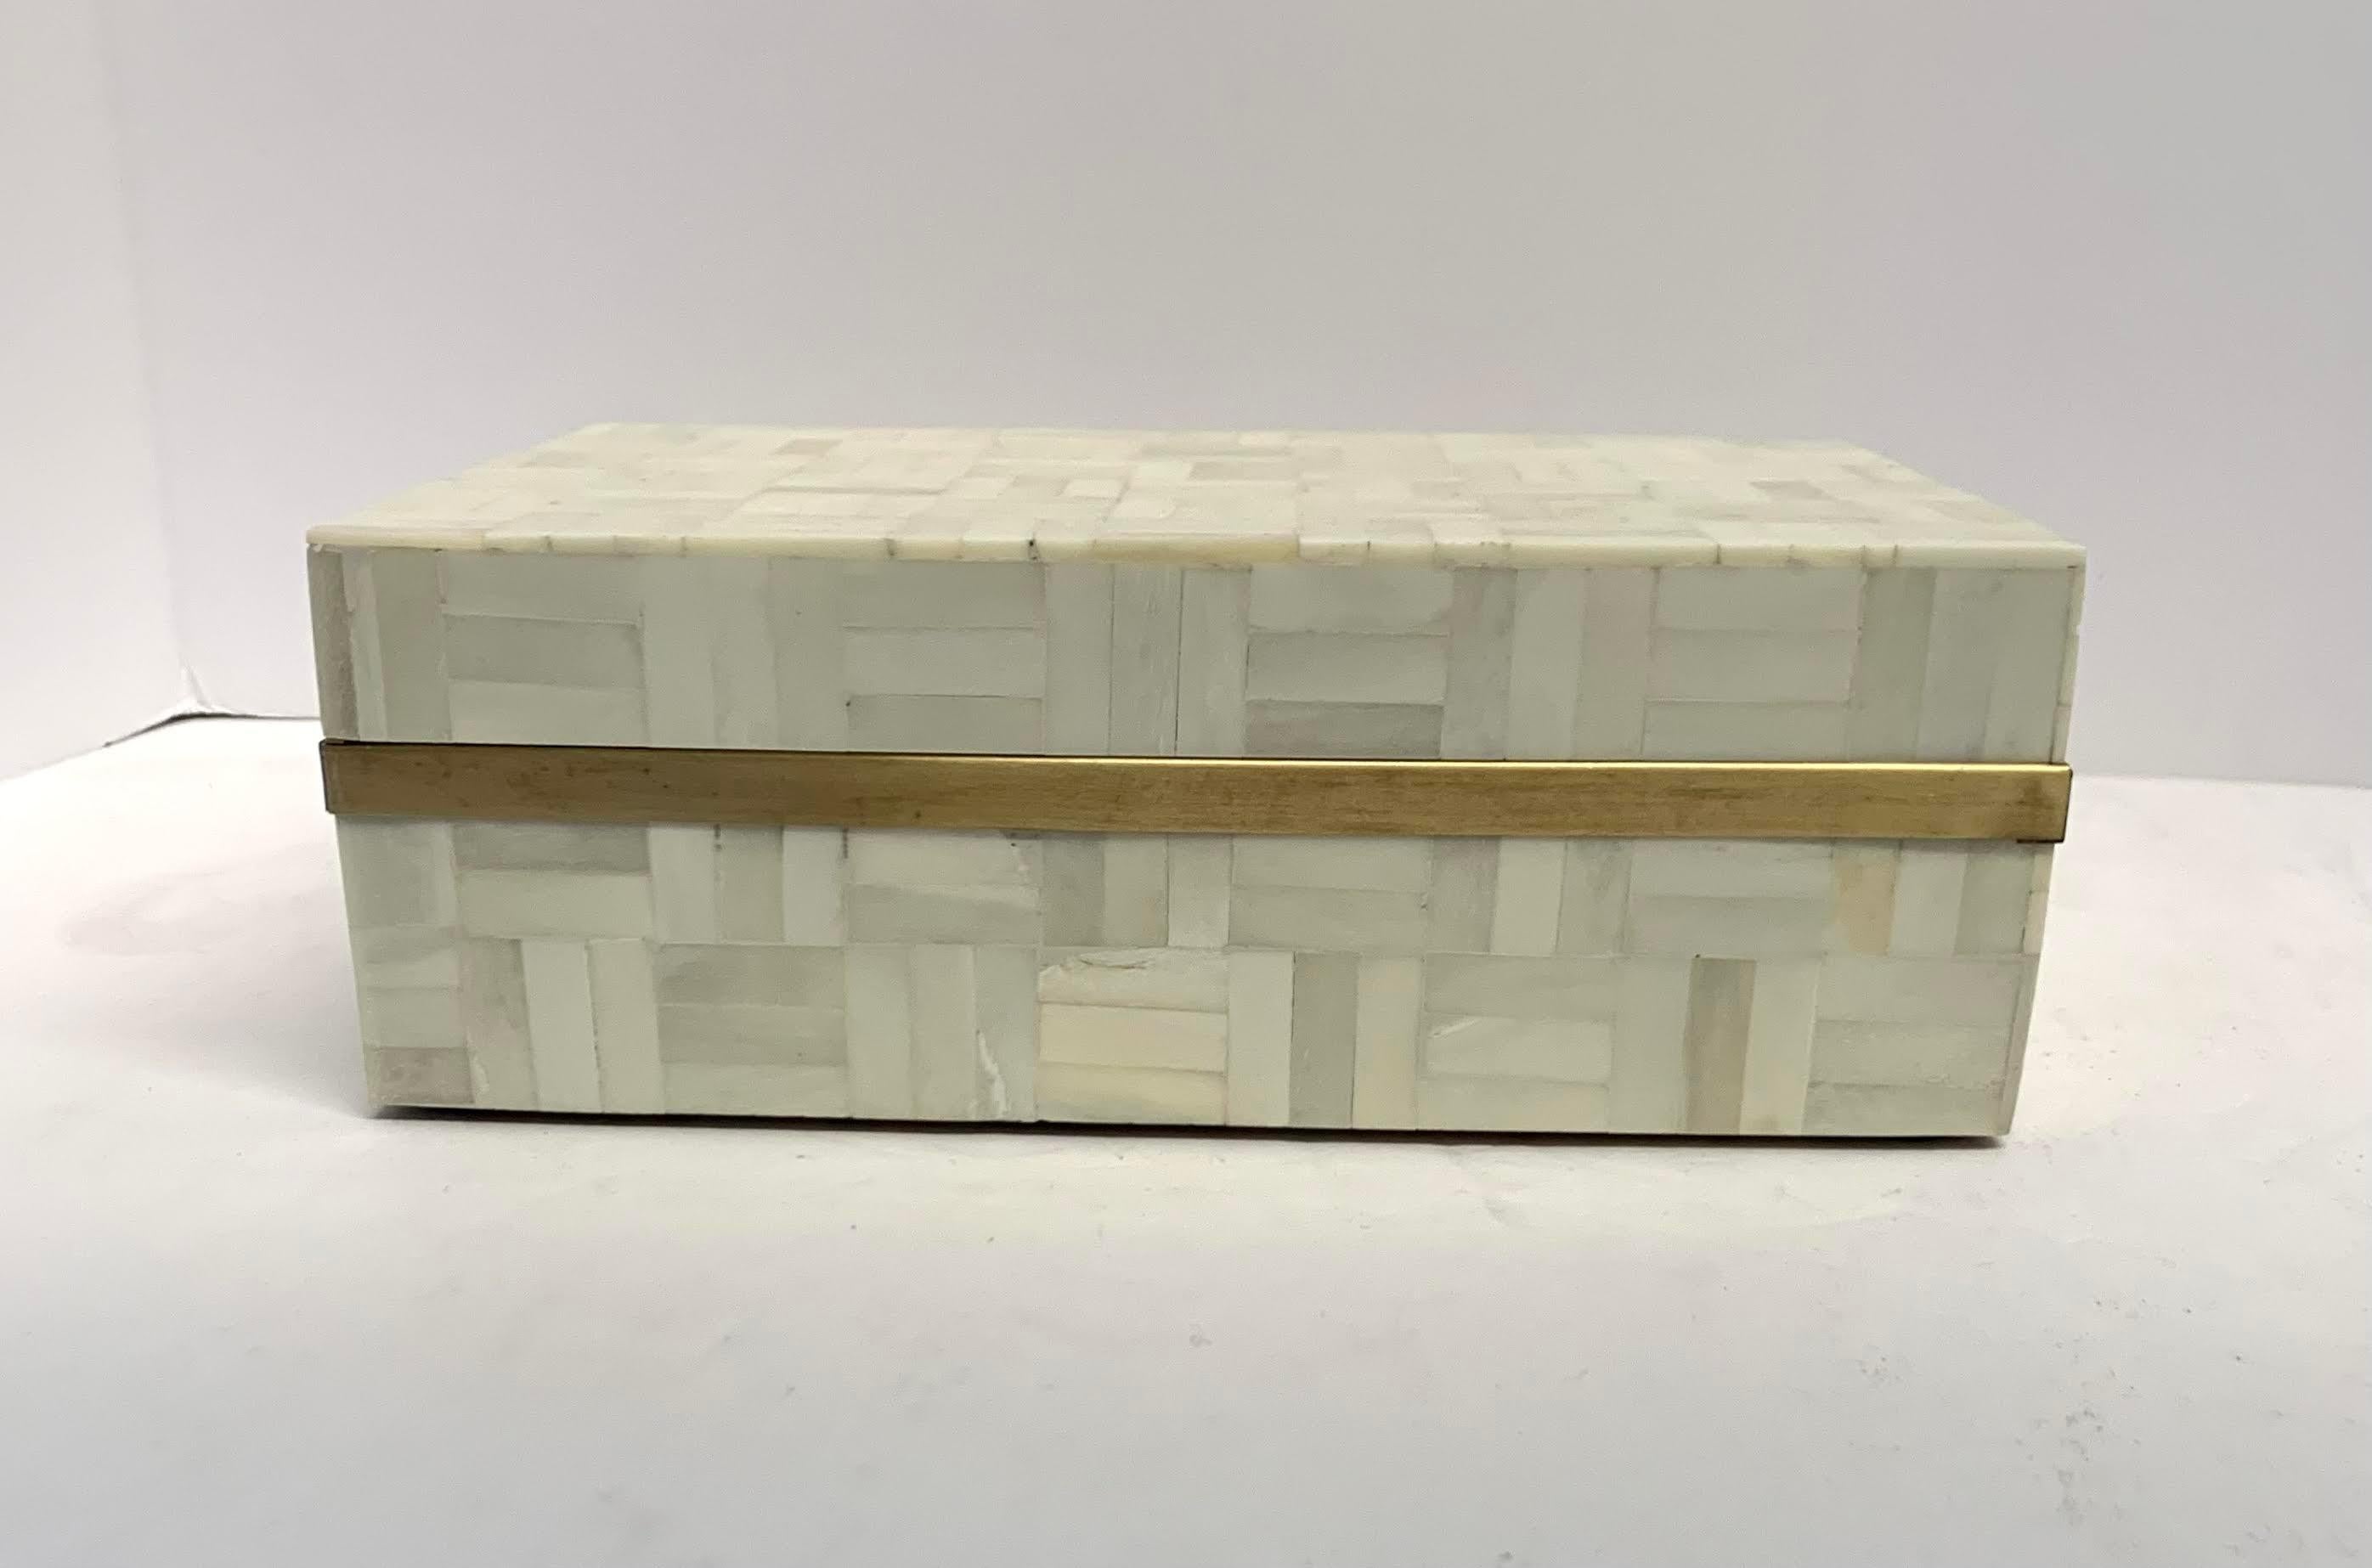 Contemporary Indian cream color lidded bone box with gold strip surround.
Strips of bone are inlaid to create a color on color checkerboard pattern.
Part of a large collection of bone boxes and trays